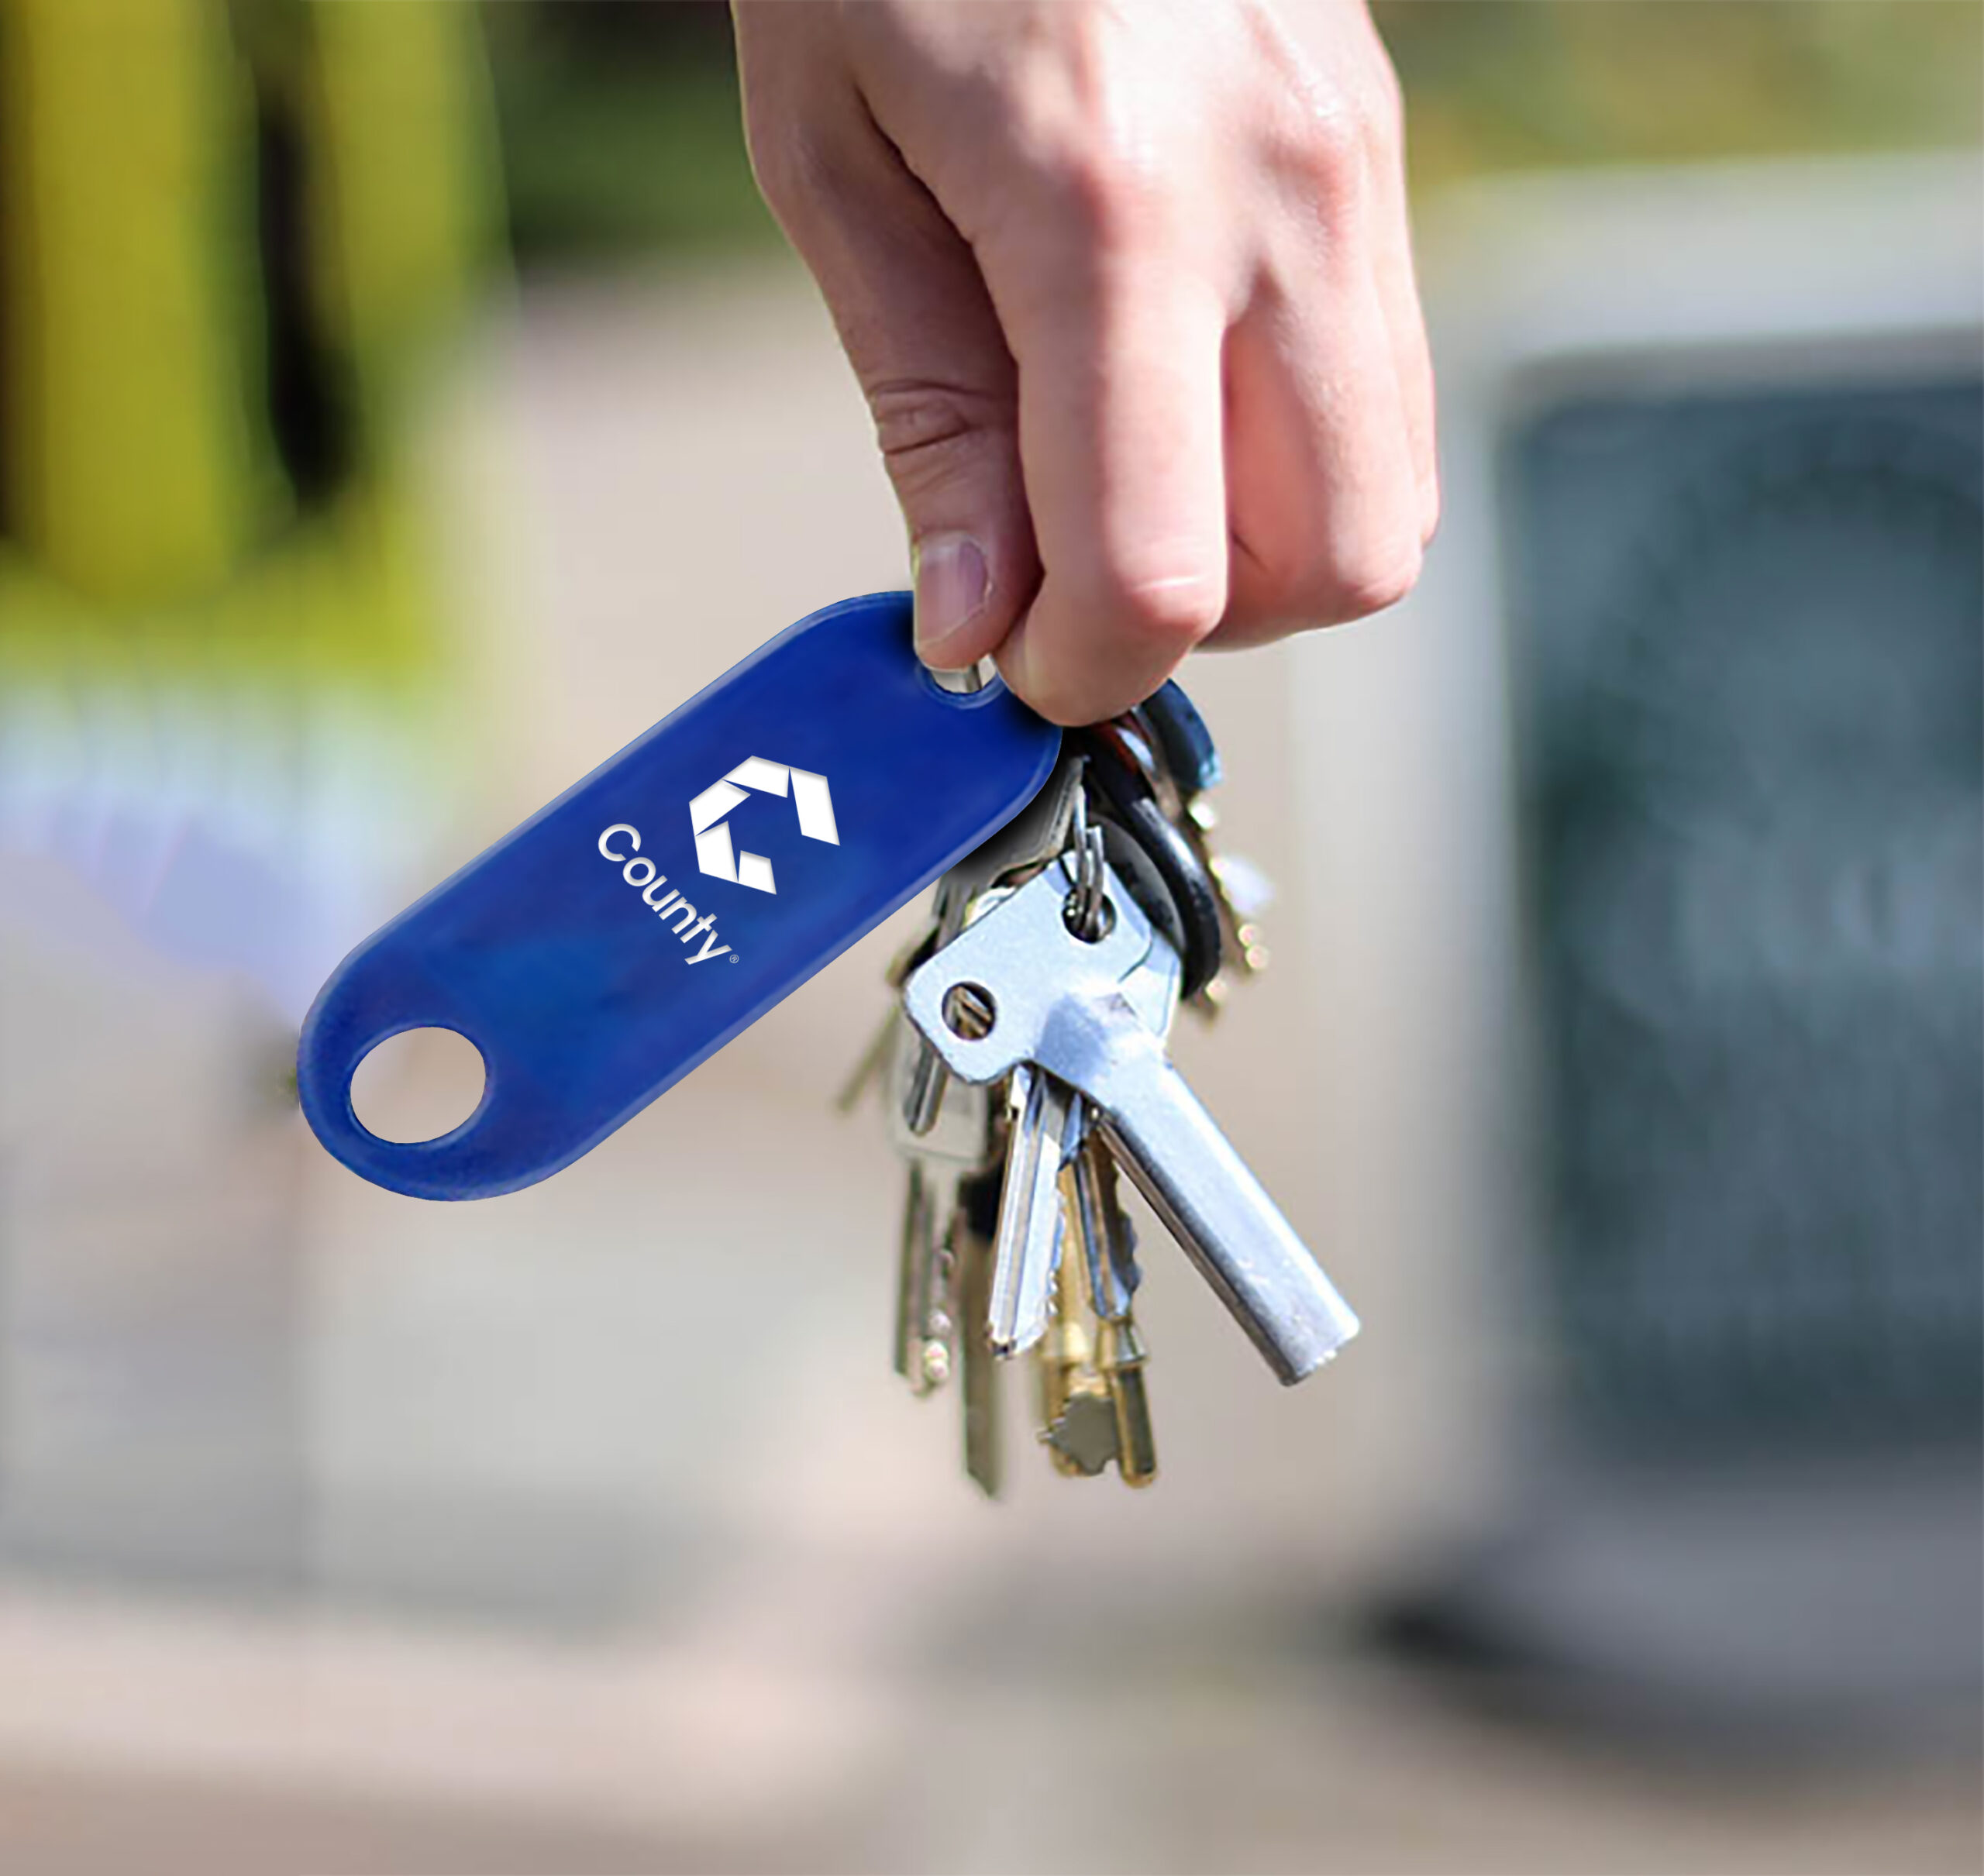 keyholding security services uk